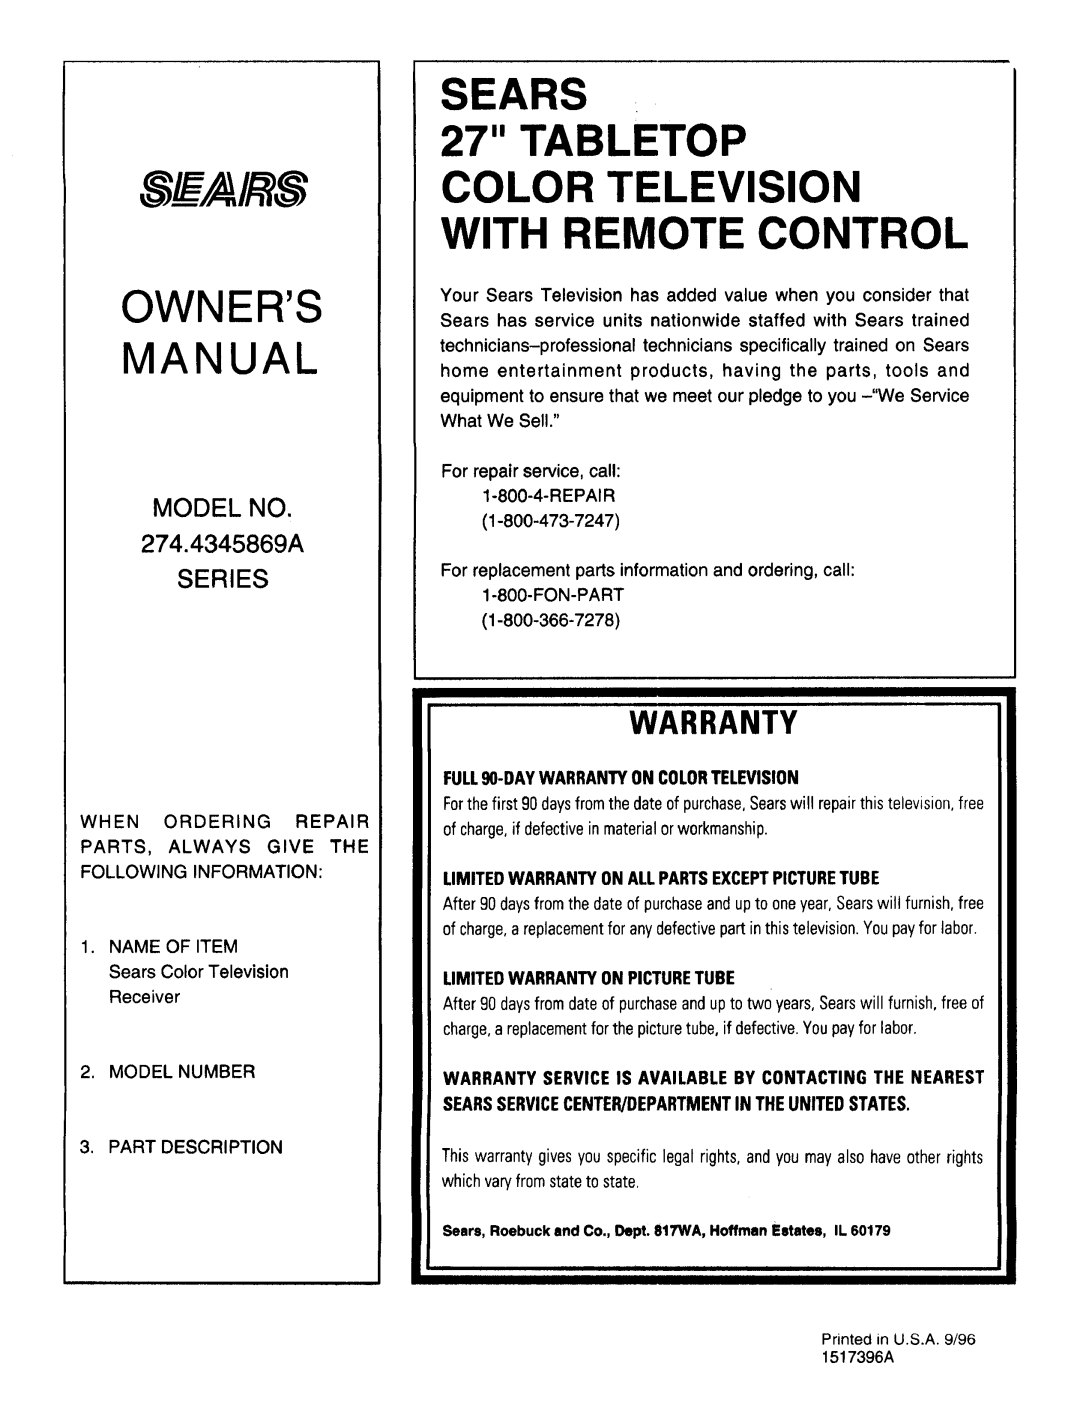 Sears 274.4345869A owner manual SEARS 27 TABLETOP COLOR TELEVISION WITH REMOTE CONTROL, Warranty, Owners Manual 